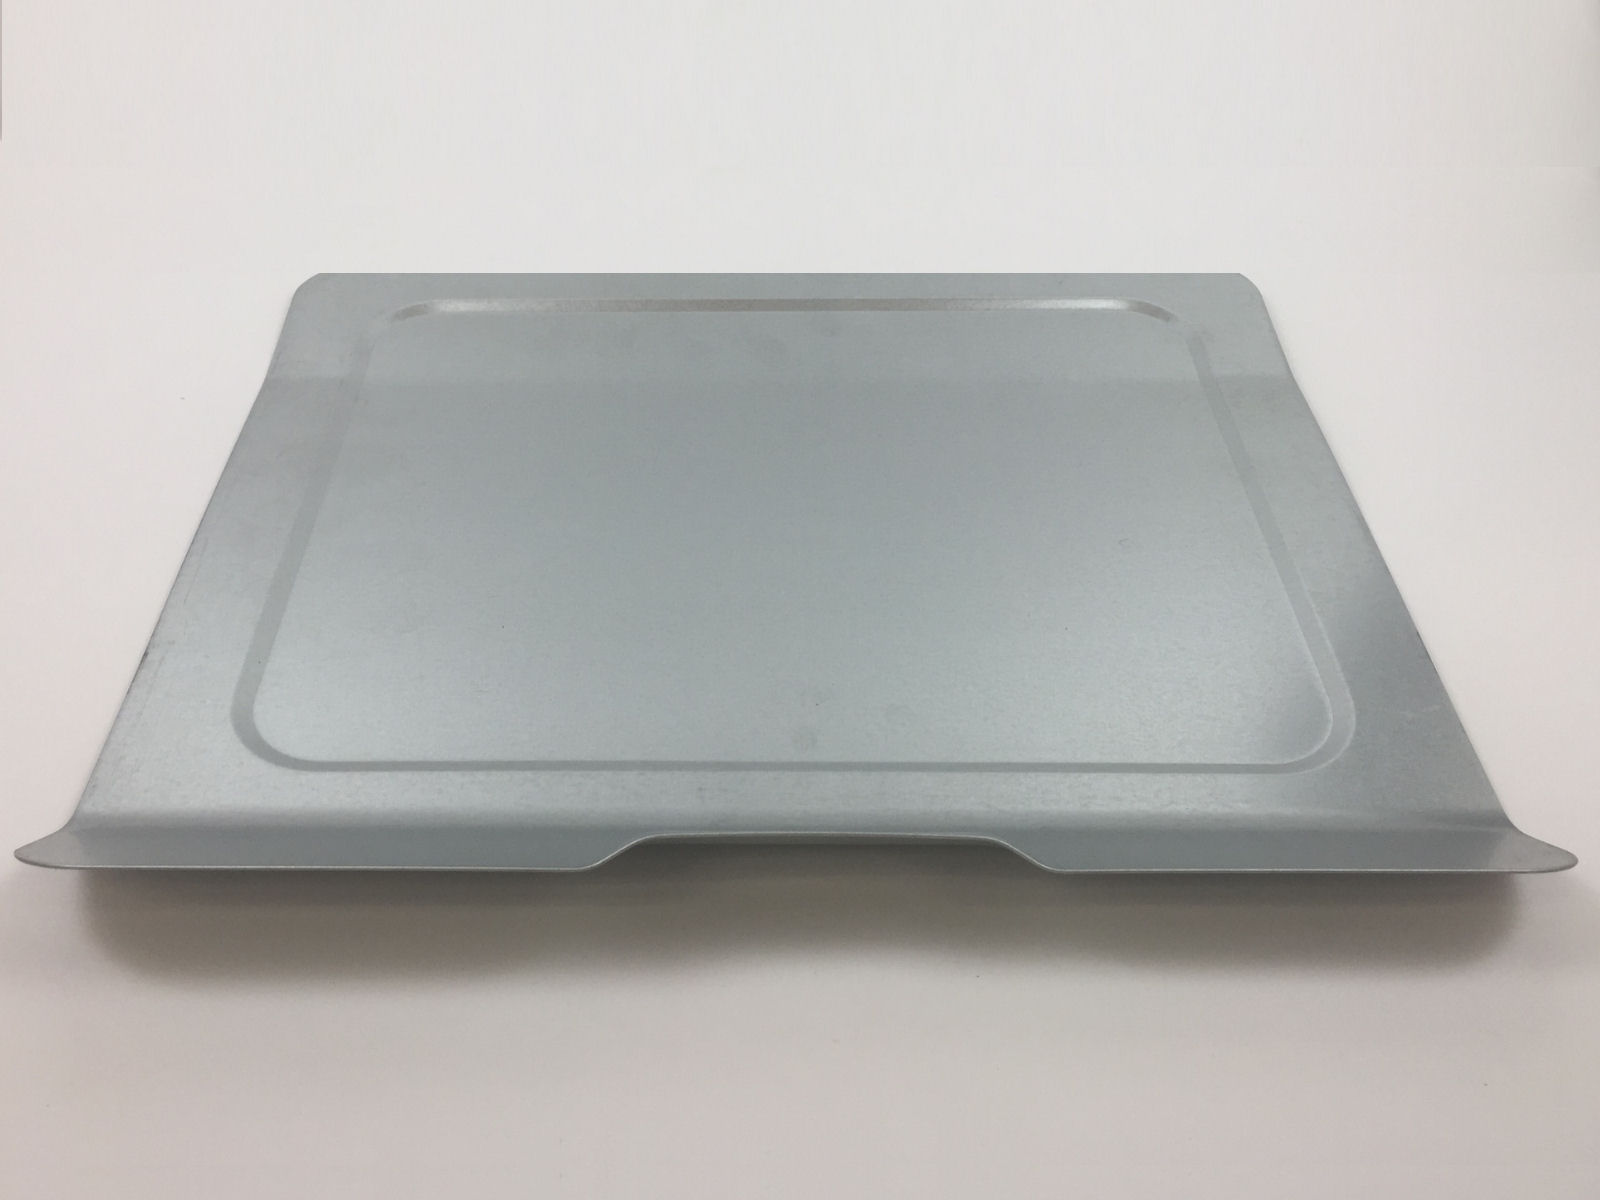 Get parts for Crumb Tray Plate